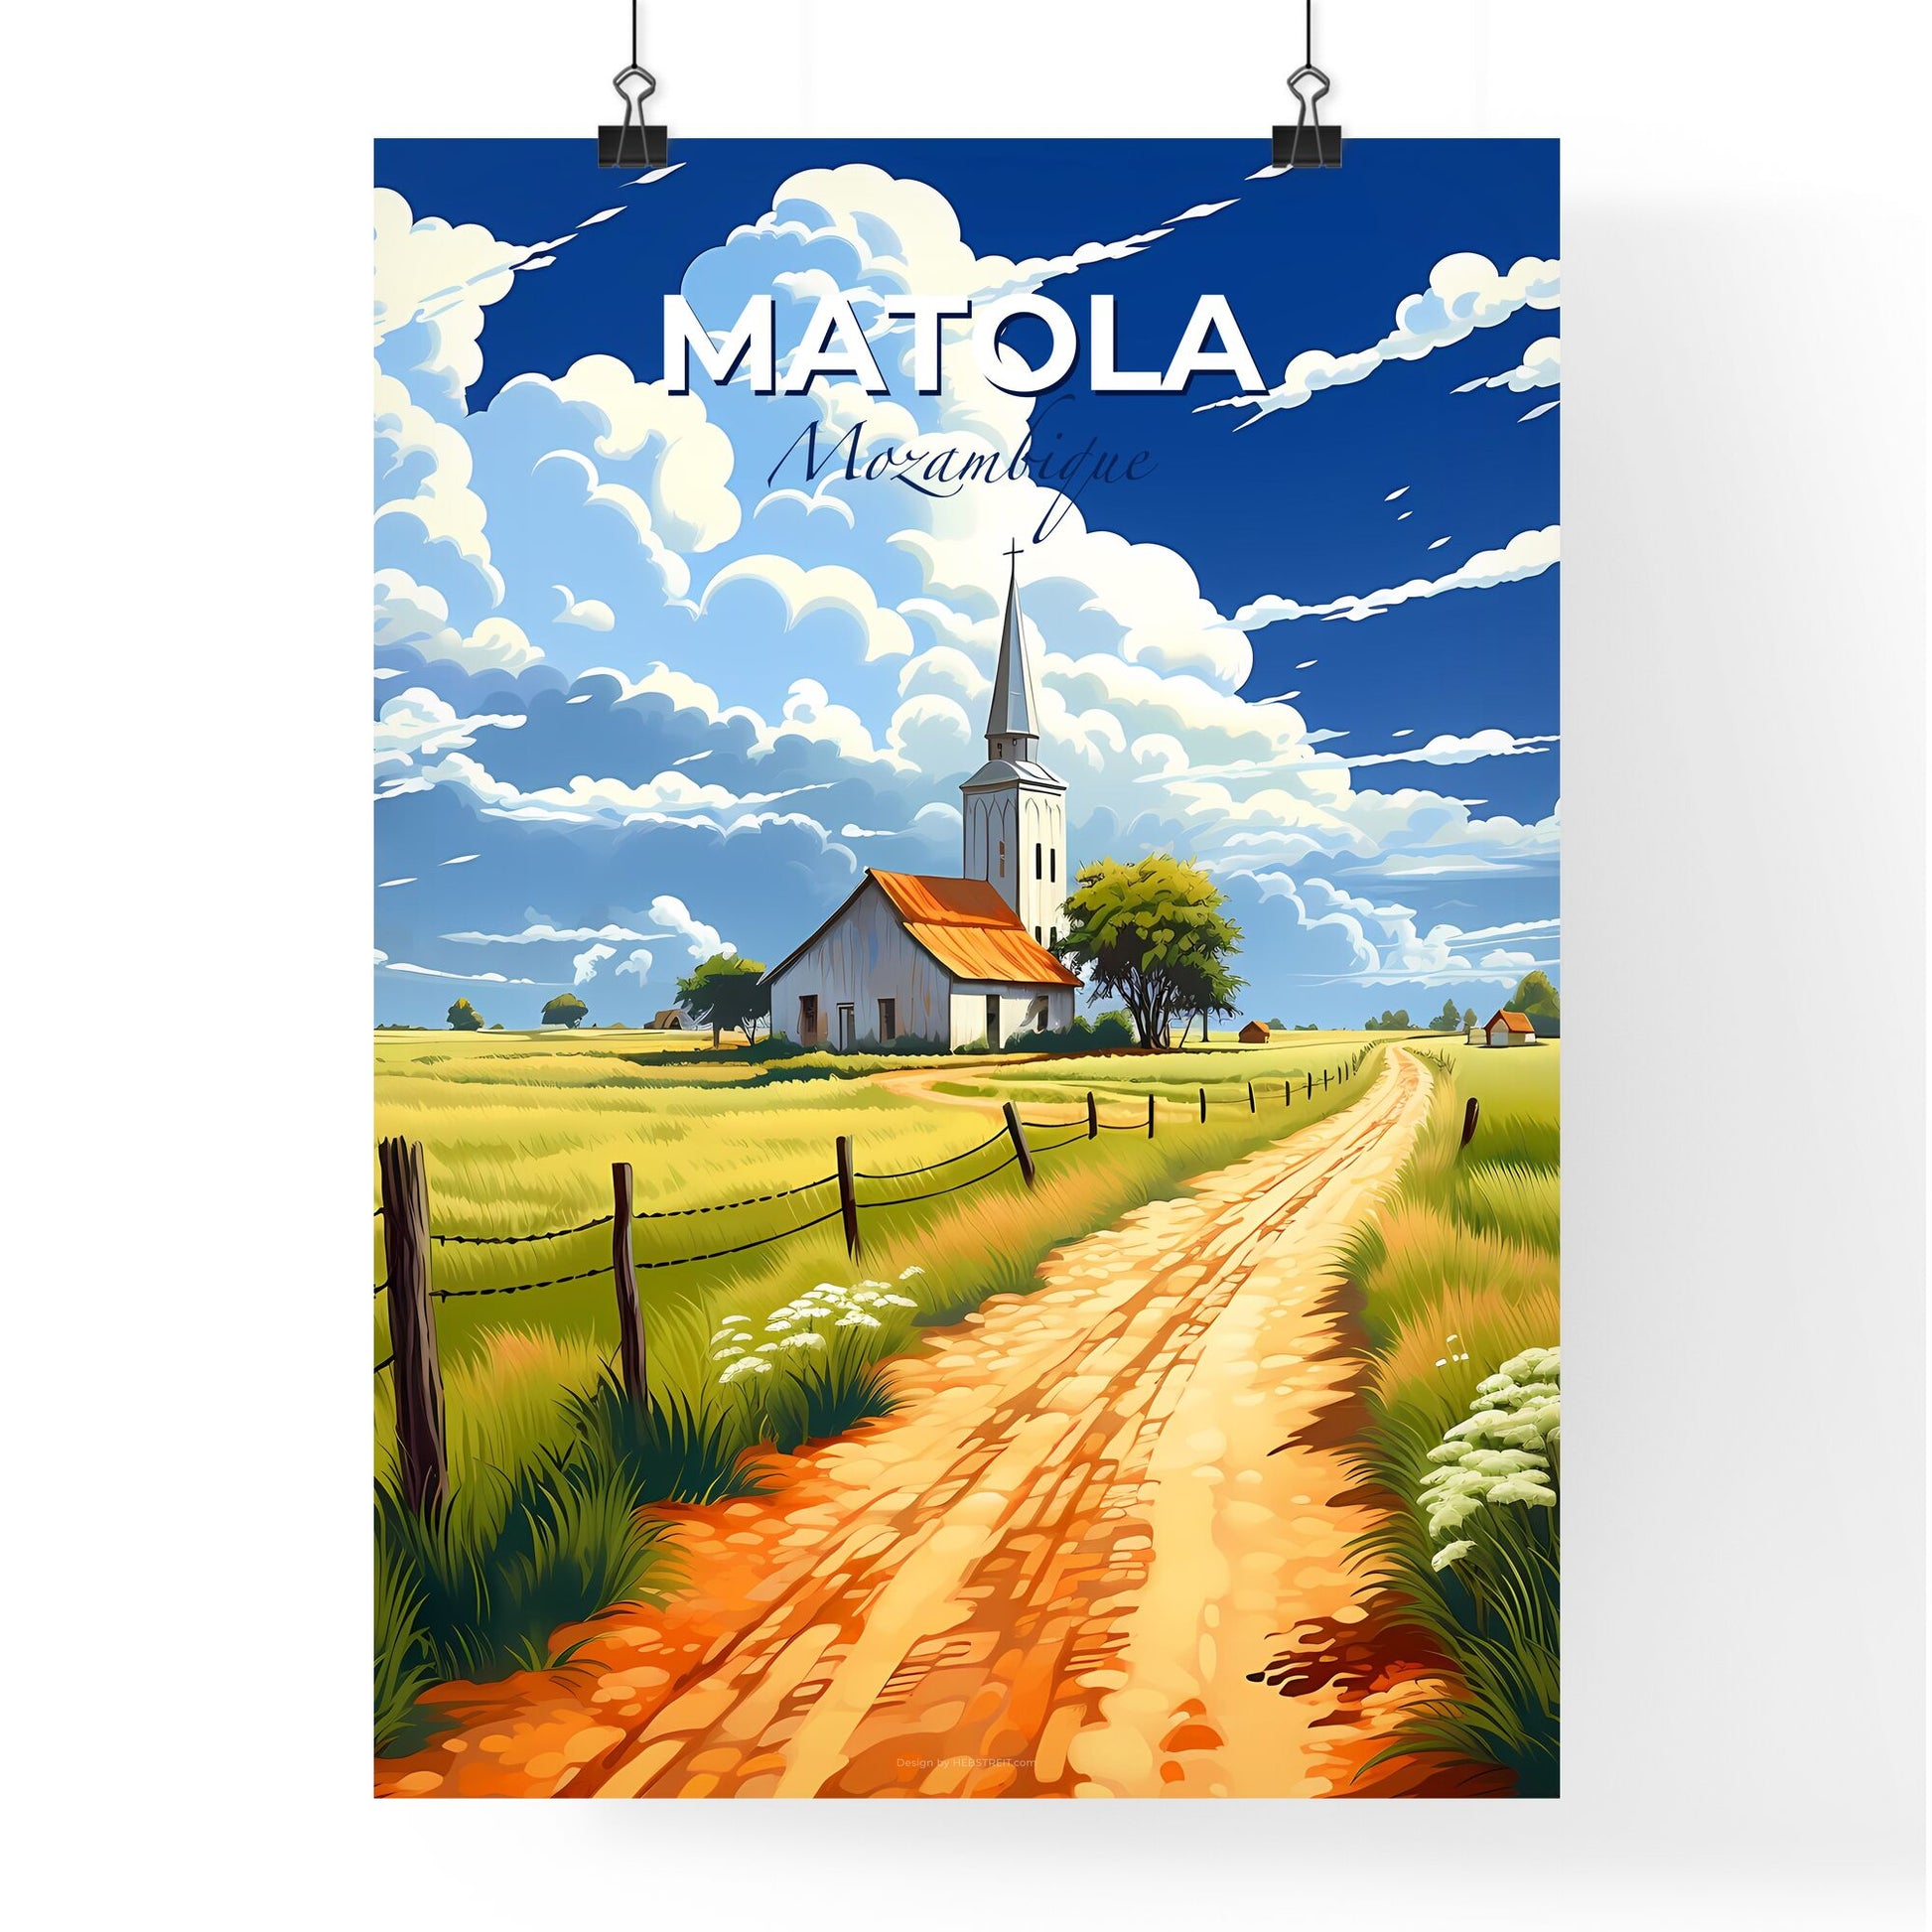 Matola, Mozambique Cityscape Painting: Artful Dirt Road to Church Default Title